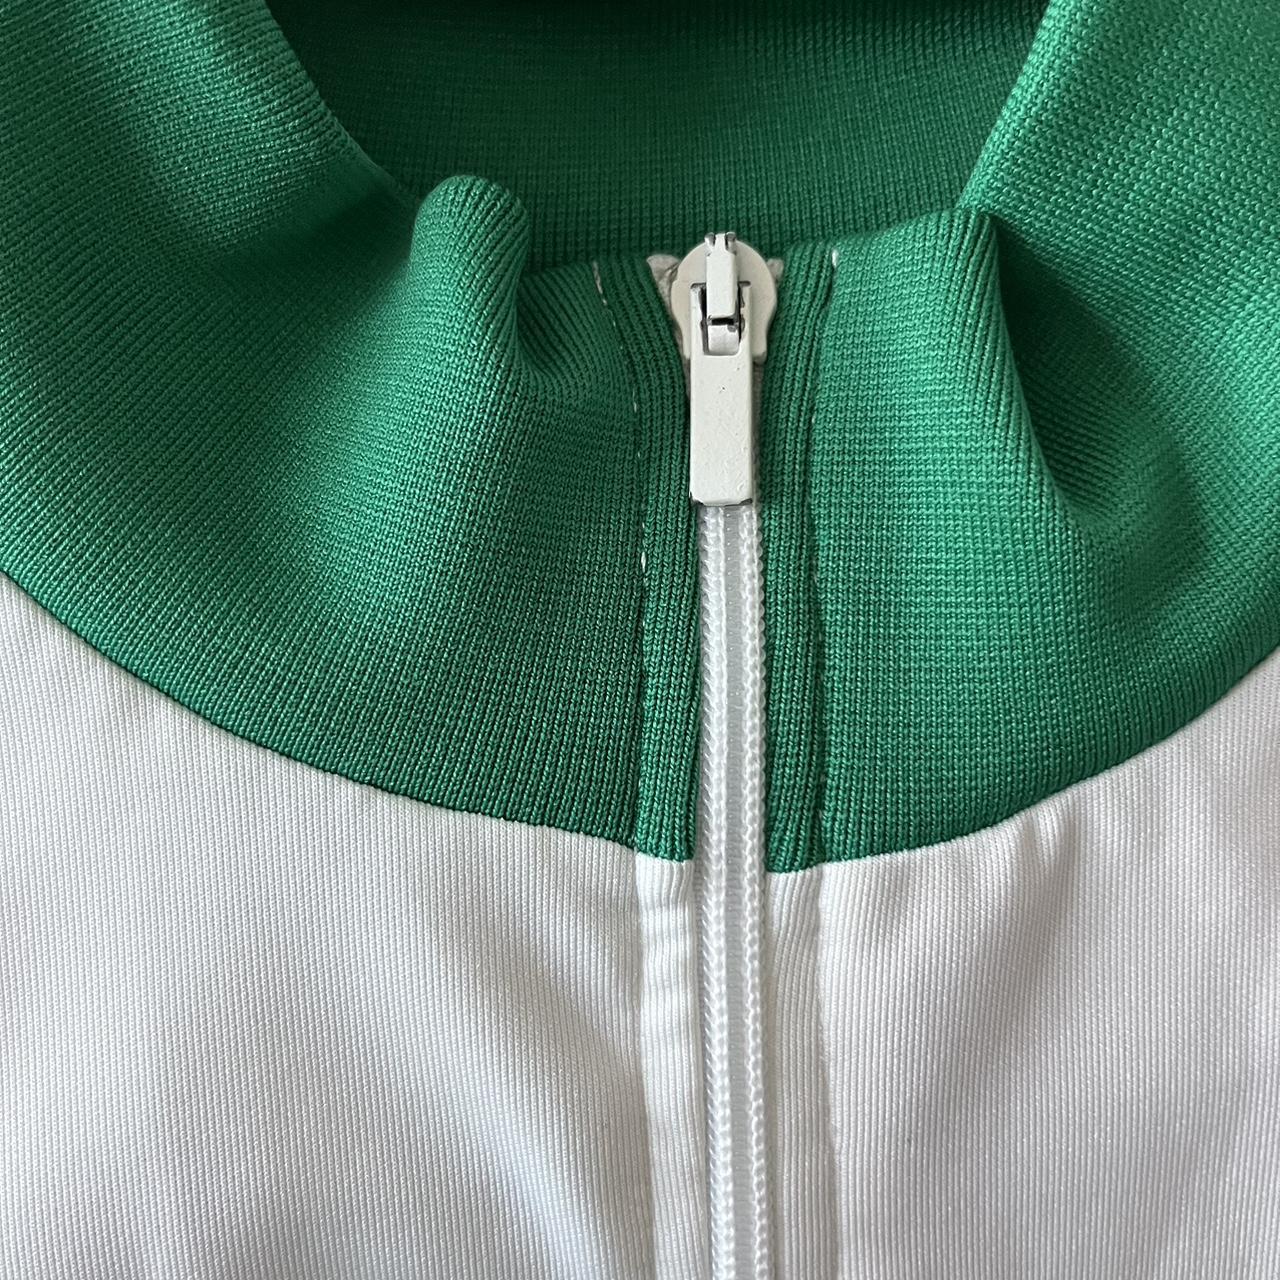 Prince Men's White and Green Jacket (3)